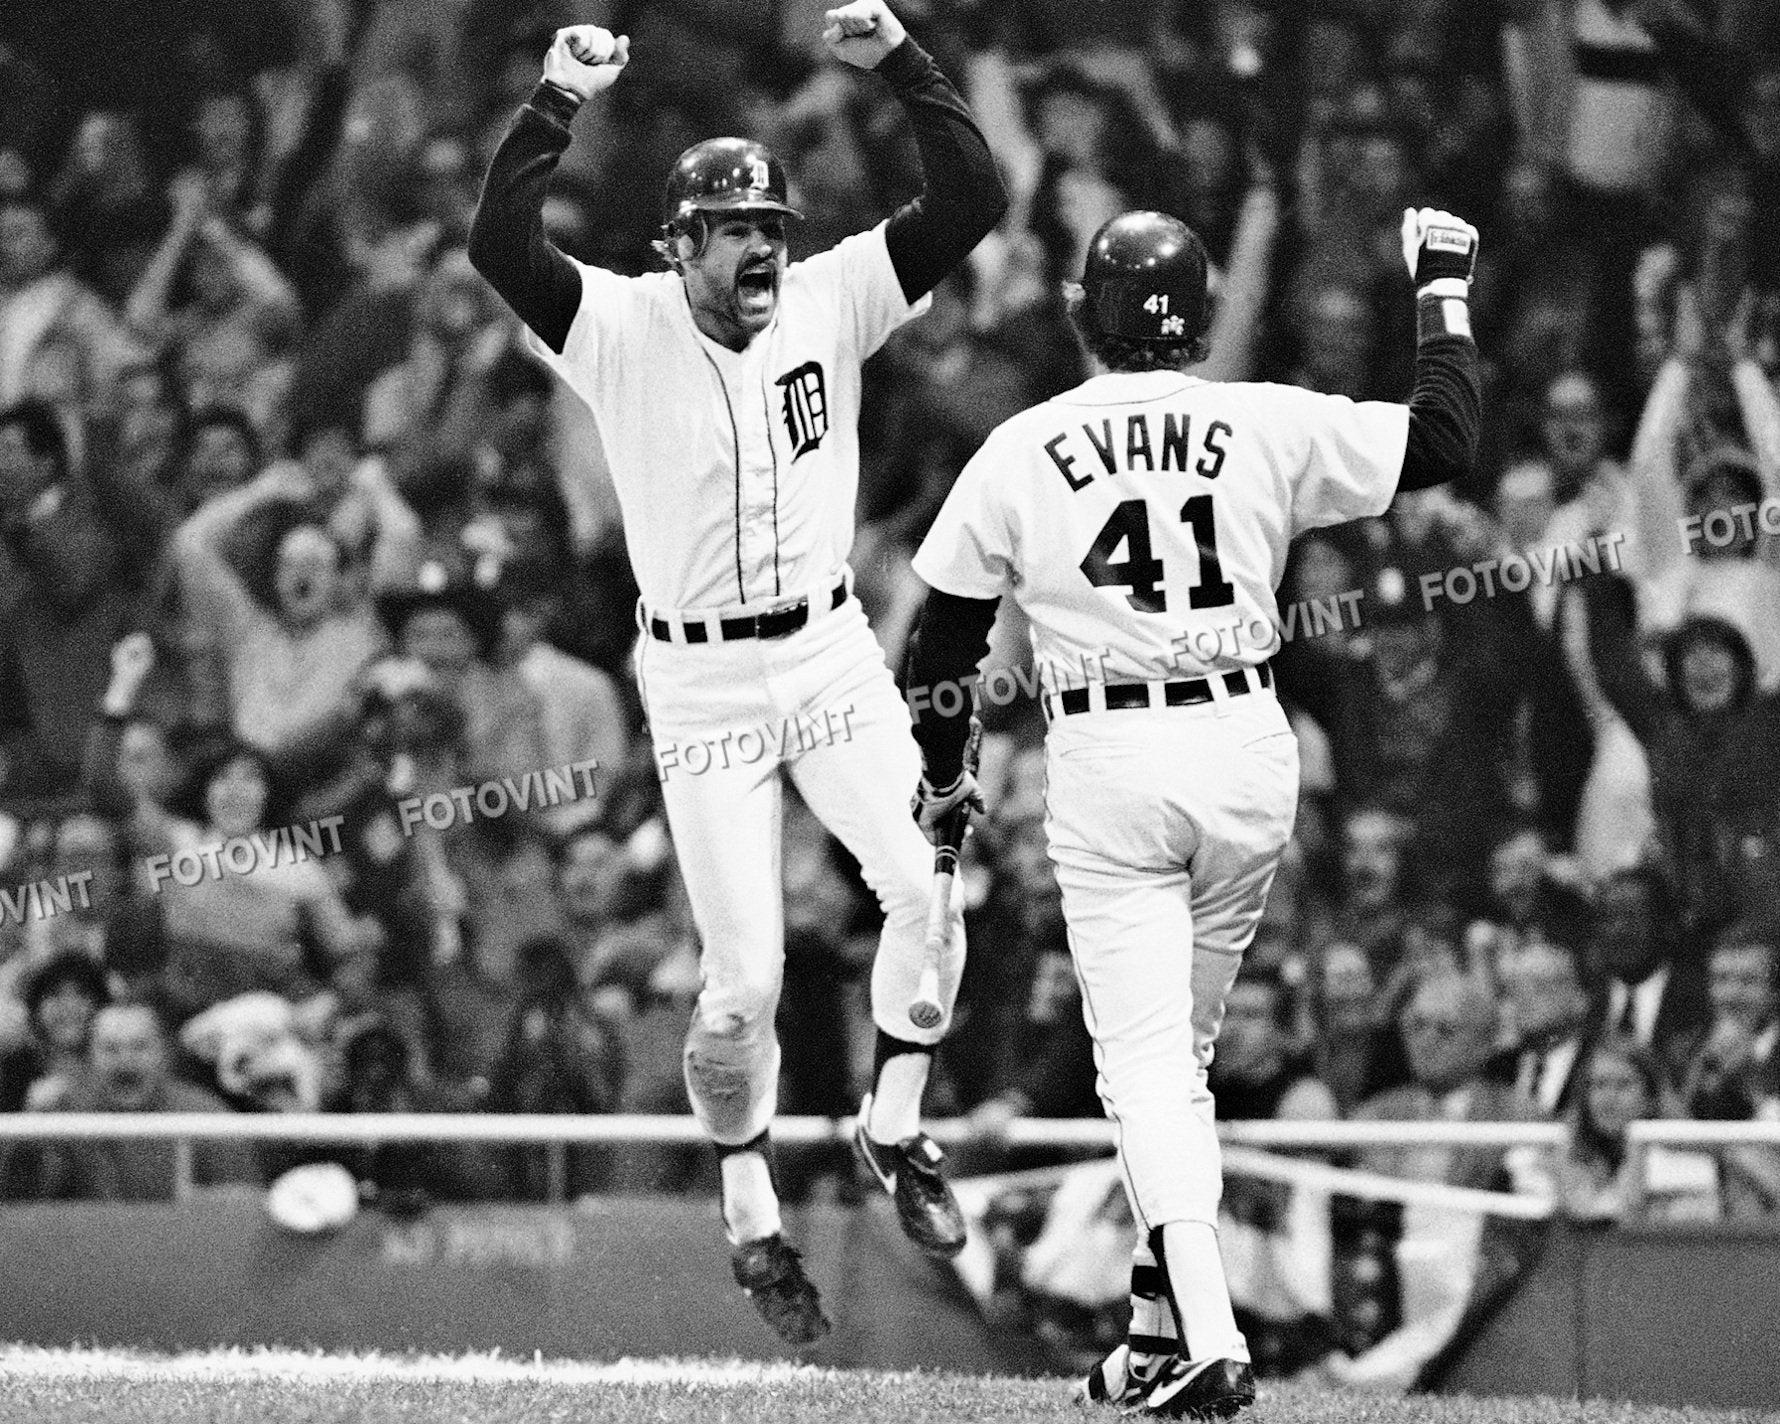 KIRK GIBSON Photo Picture DETROIT Tigers 1984 World Series Baseball  Photograph Print 8x10, 8.5x11 or 11x14 (KG1)